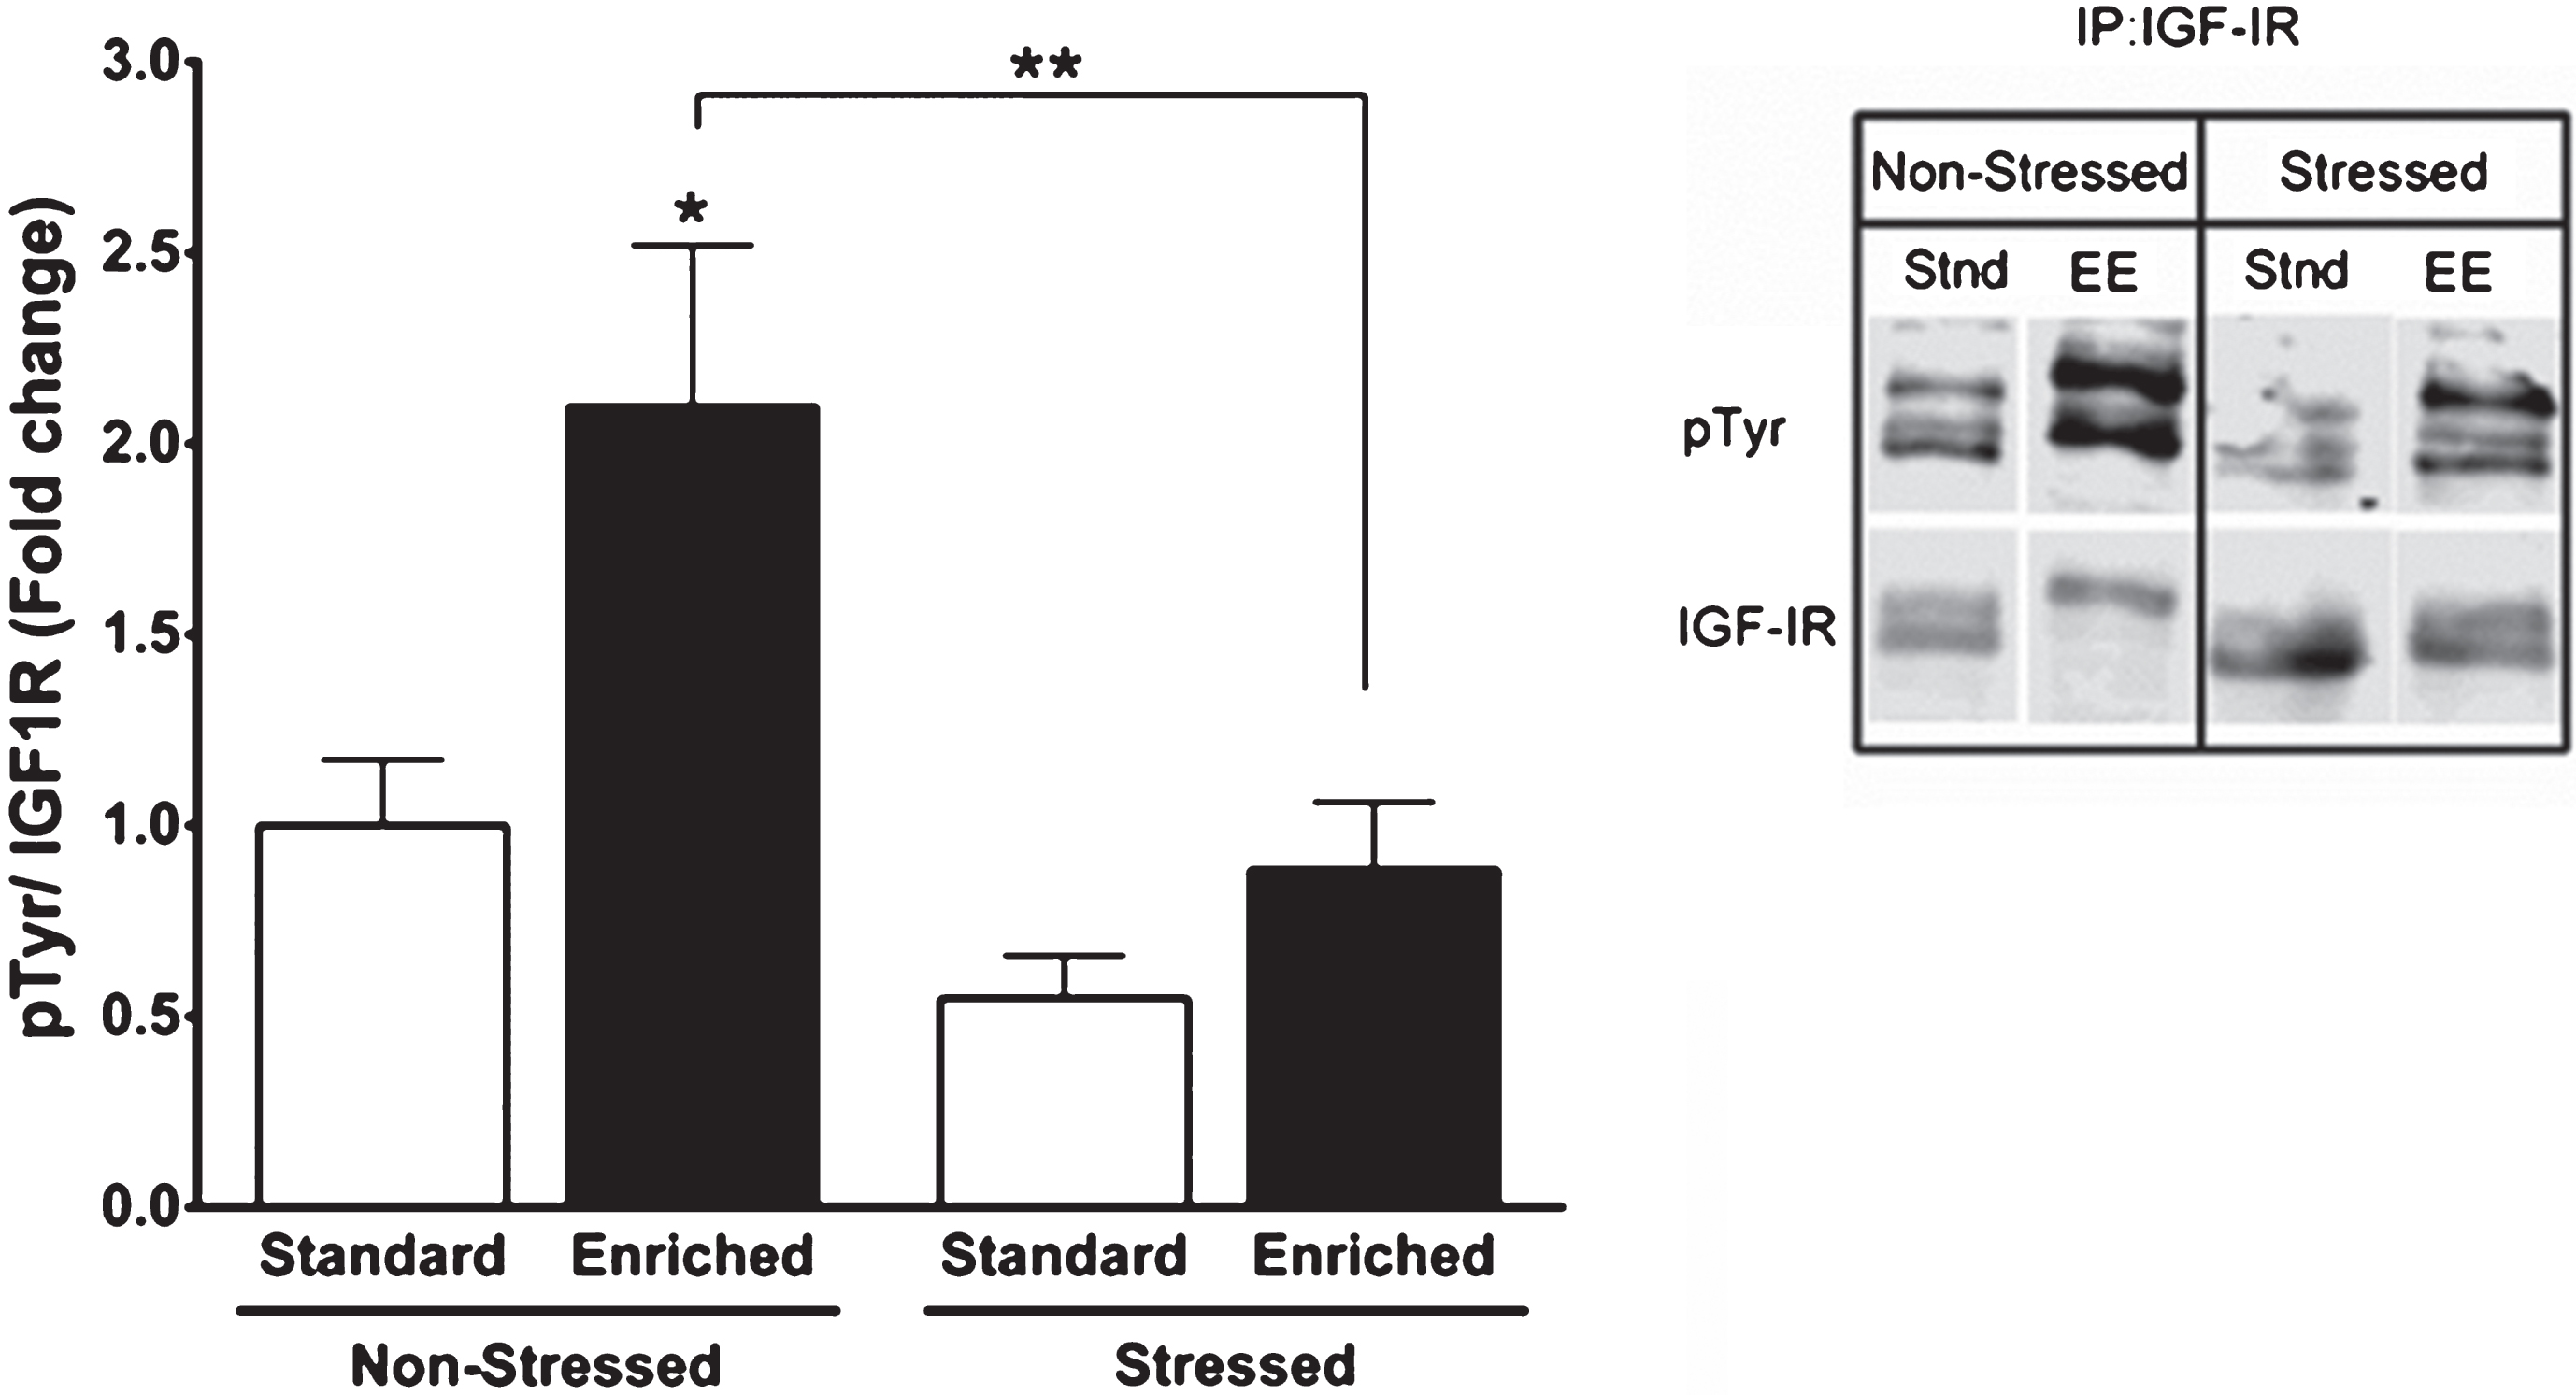 Stress reduces IGF-I signaling in brain. C57BL/6 mice were exposed to a predator (a rat) or a sham predator (a toy rat) for 10 minutes. An environmental enrichment (EE) protocol was used 24 hours later in half of the animals to increase the entrance of IGF-I into the brain [69], while the rest stayed at their home cages (Stand: standard housing). After 2 hours of EE, animals where sacrificed and their hippocampi collected to determine levels of phosphorylated IGF-I receptor. Both the enrichment and the immunoprecipitation + western blot protocols were performed as described [194].